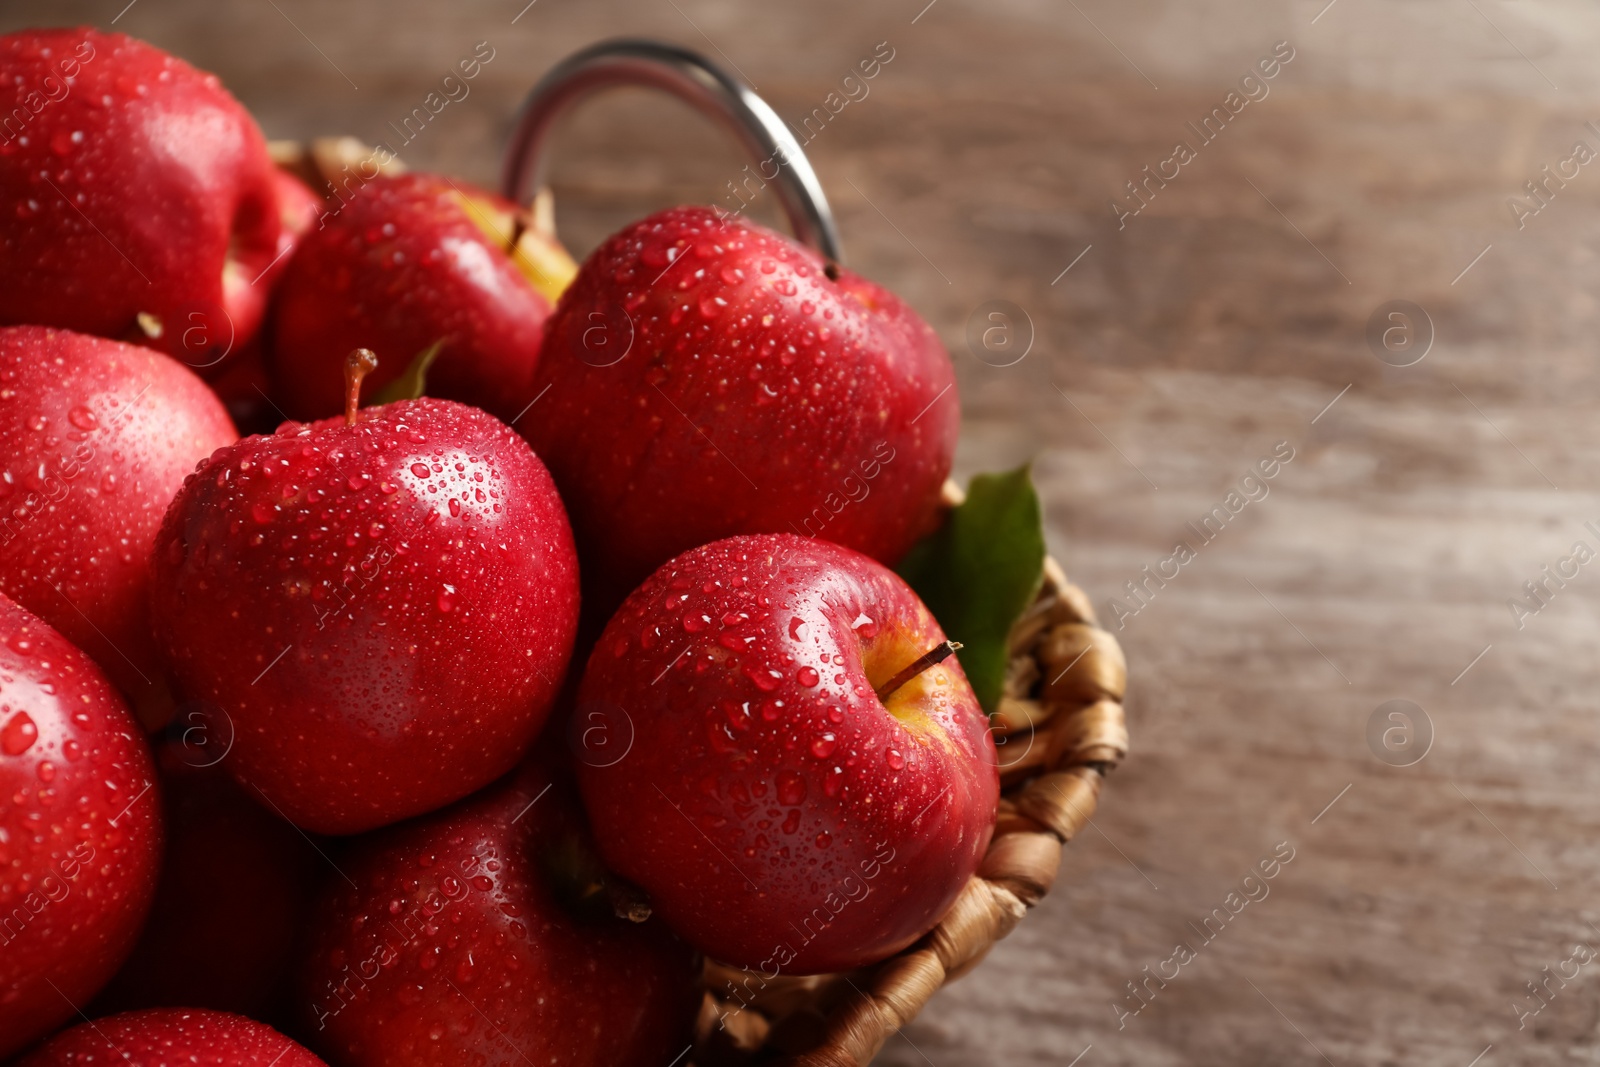 Photo of Basket with fresh ripe red apples on wooden table, closeup